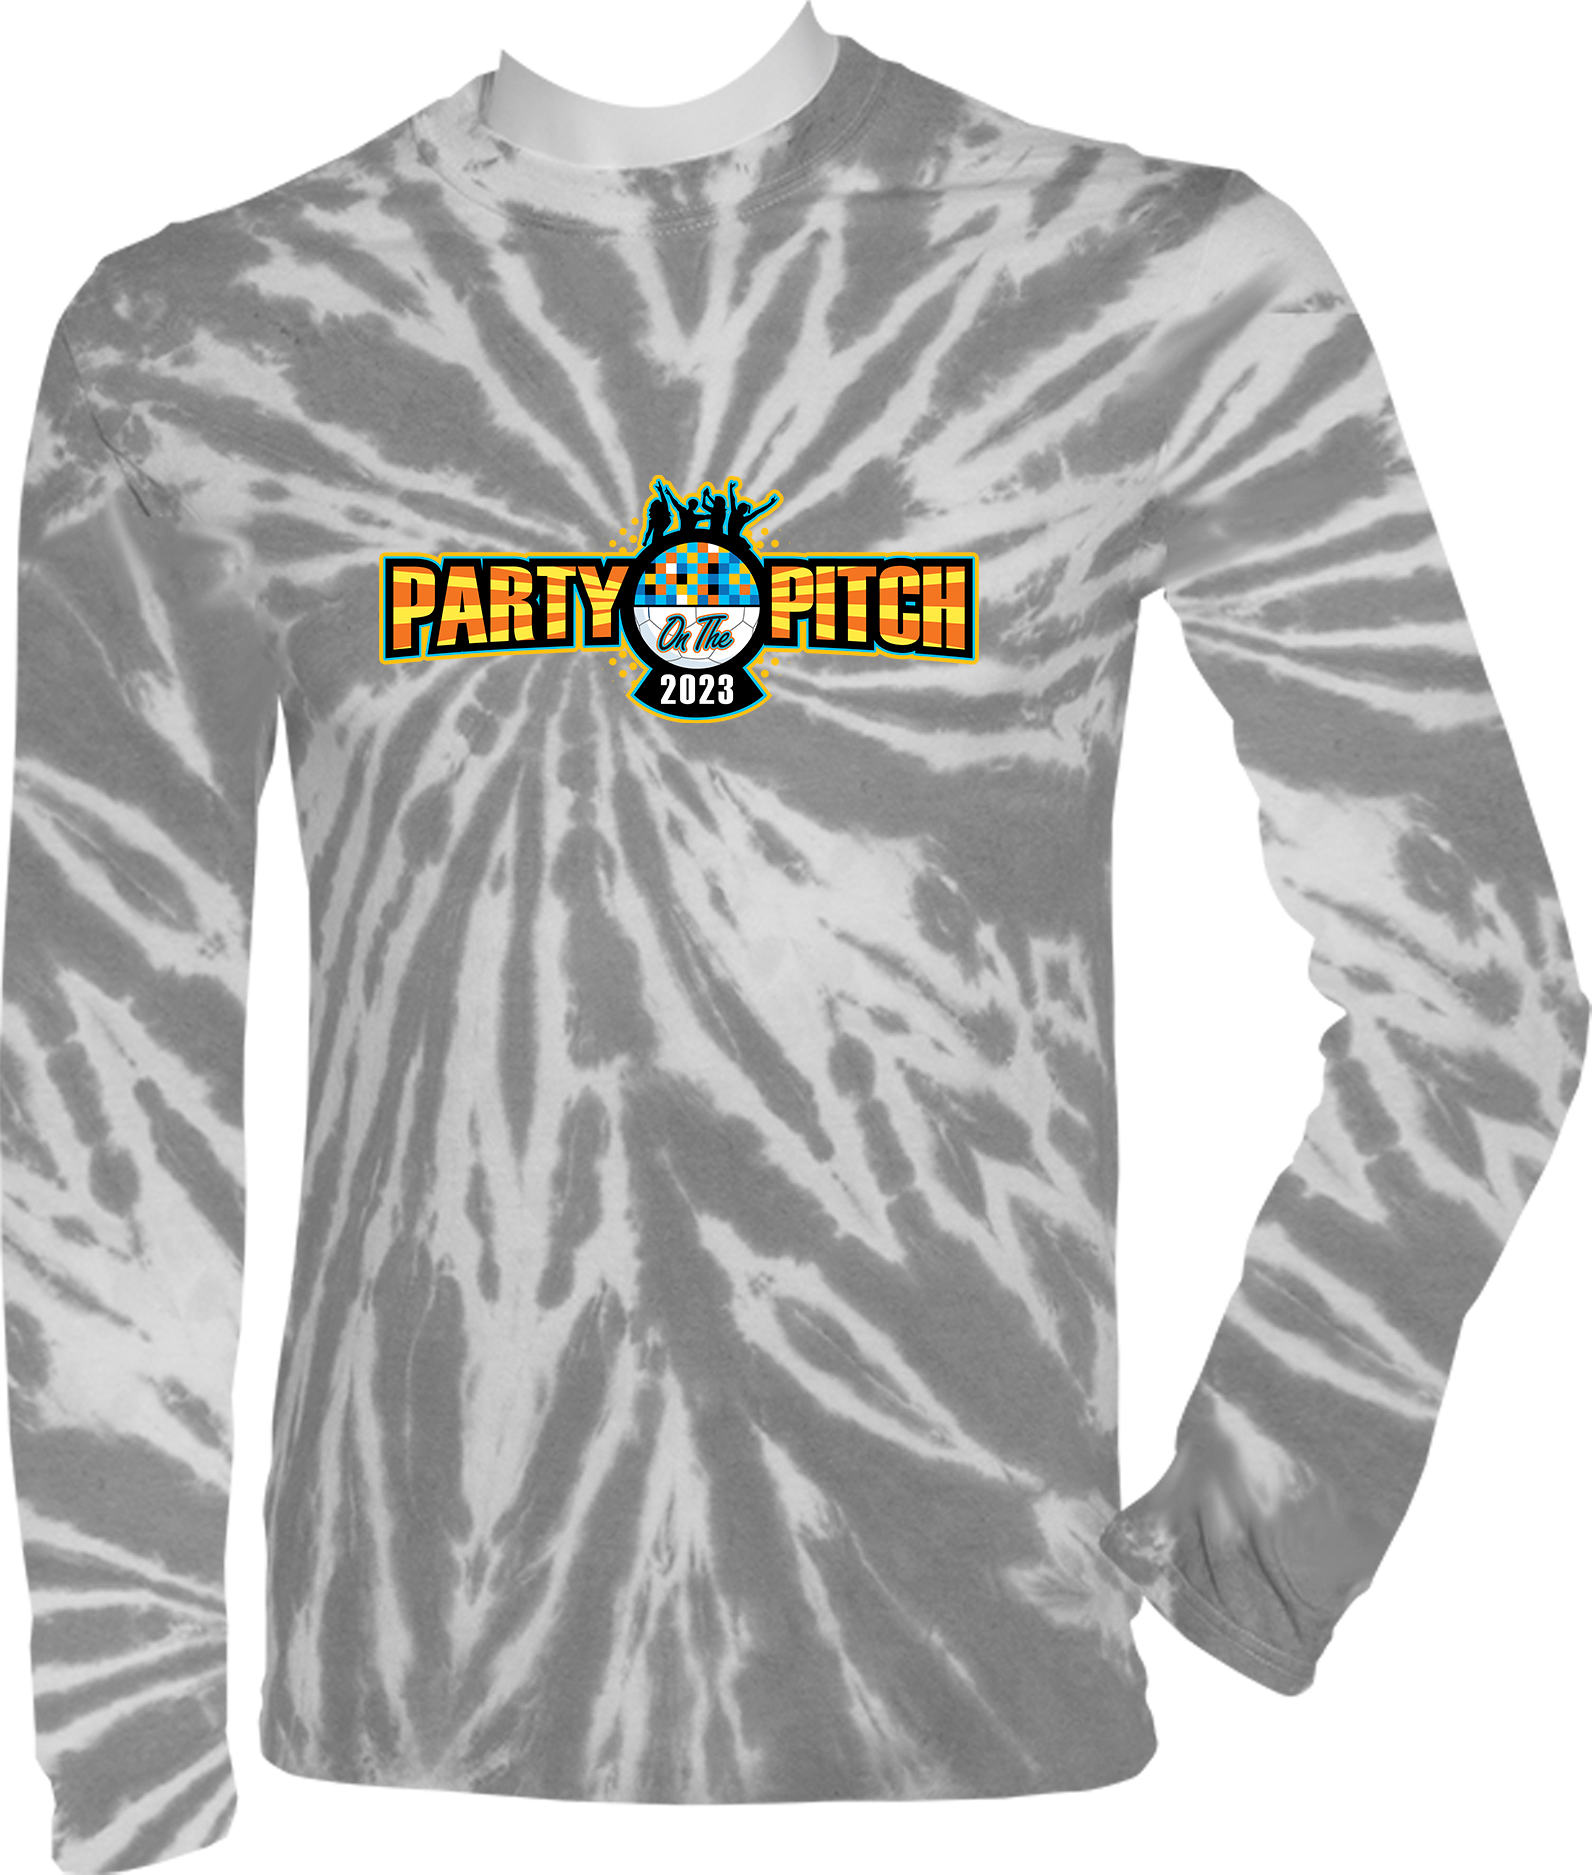 TIE-DYE LONG SLEEVES - 2023 Party On The Pitch